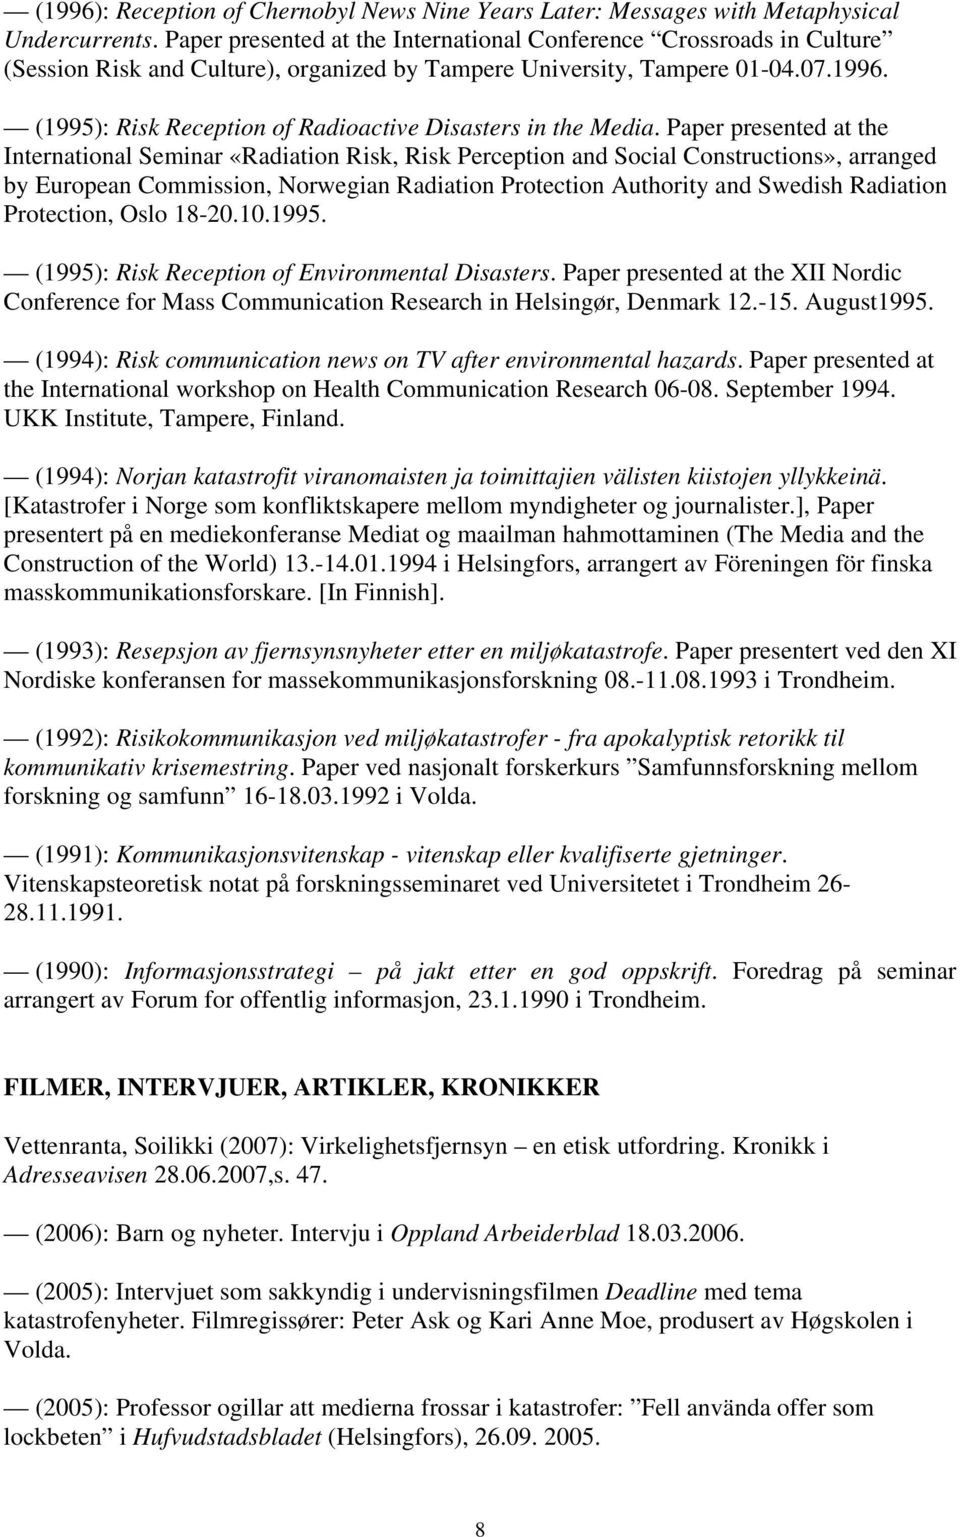 (1995): Risk Reception of Radioactive Disasters in the Media.